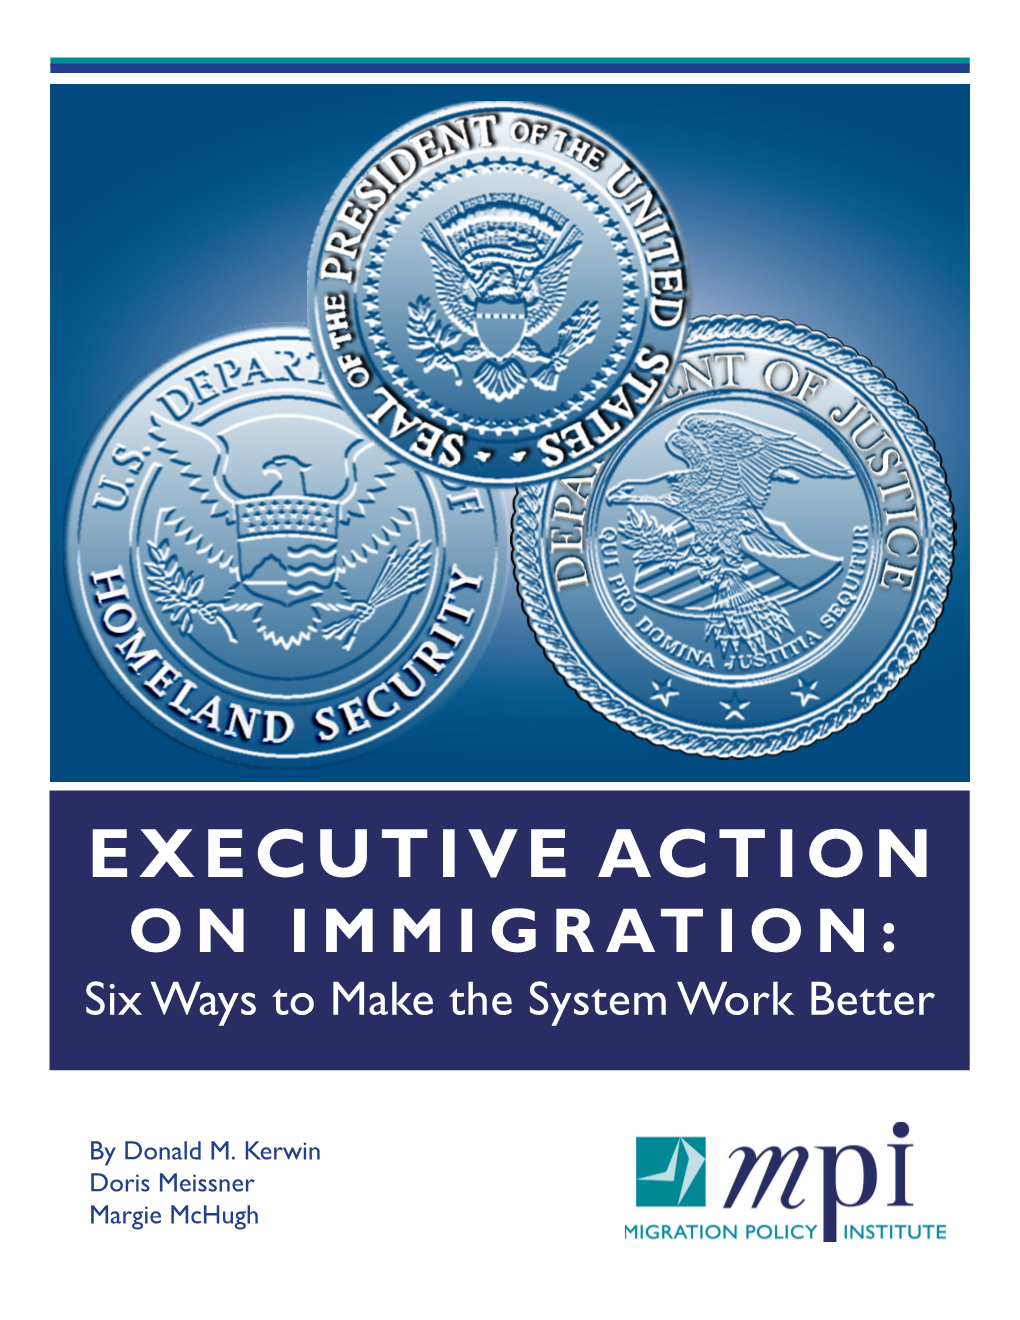 EXECUTIVE ACTION on IMMIGRATION: Six Ways to Make the System Work Better